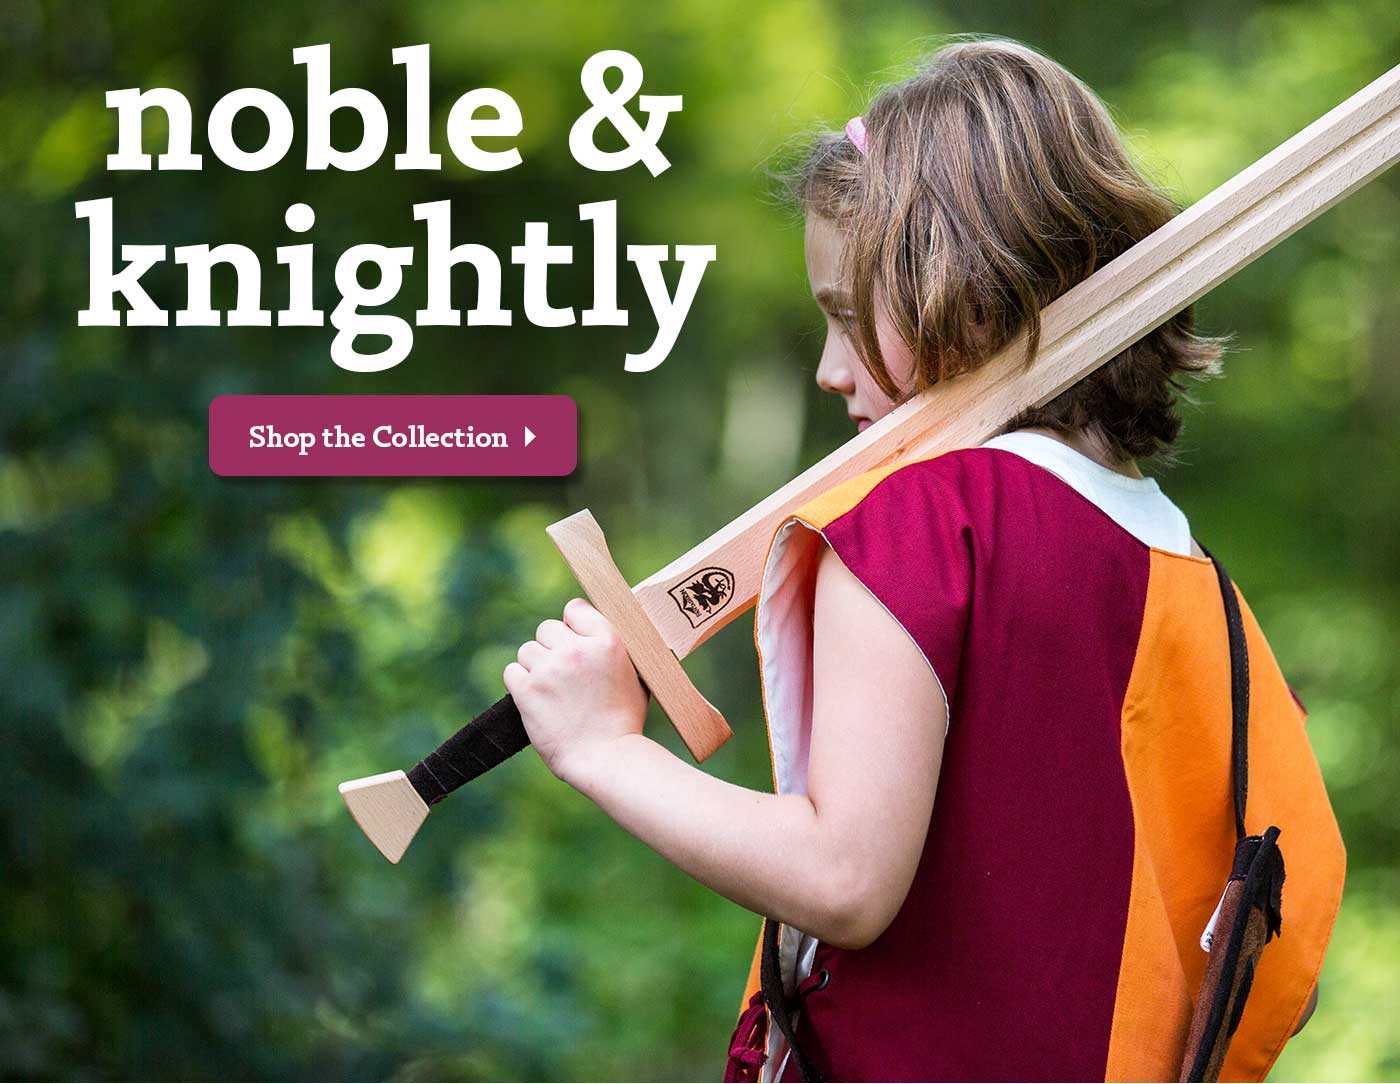 noble & knightly